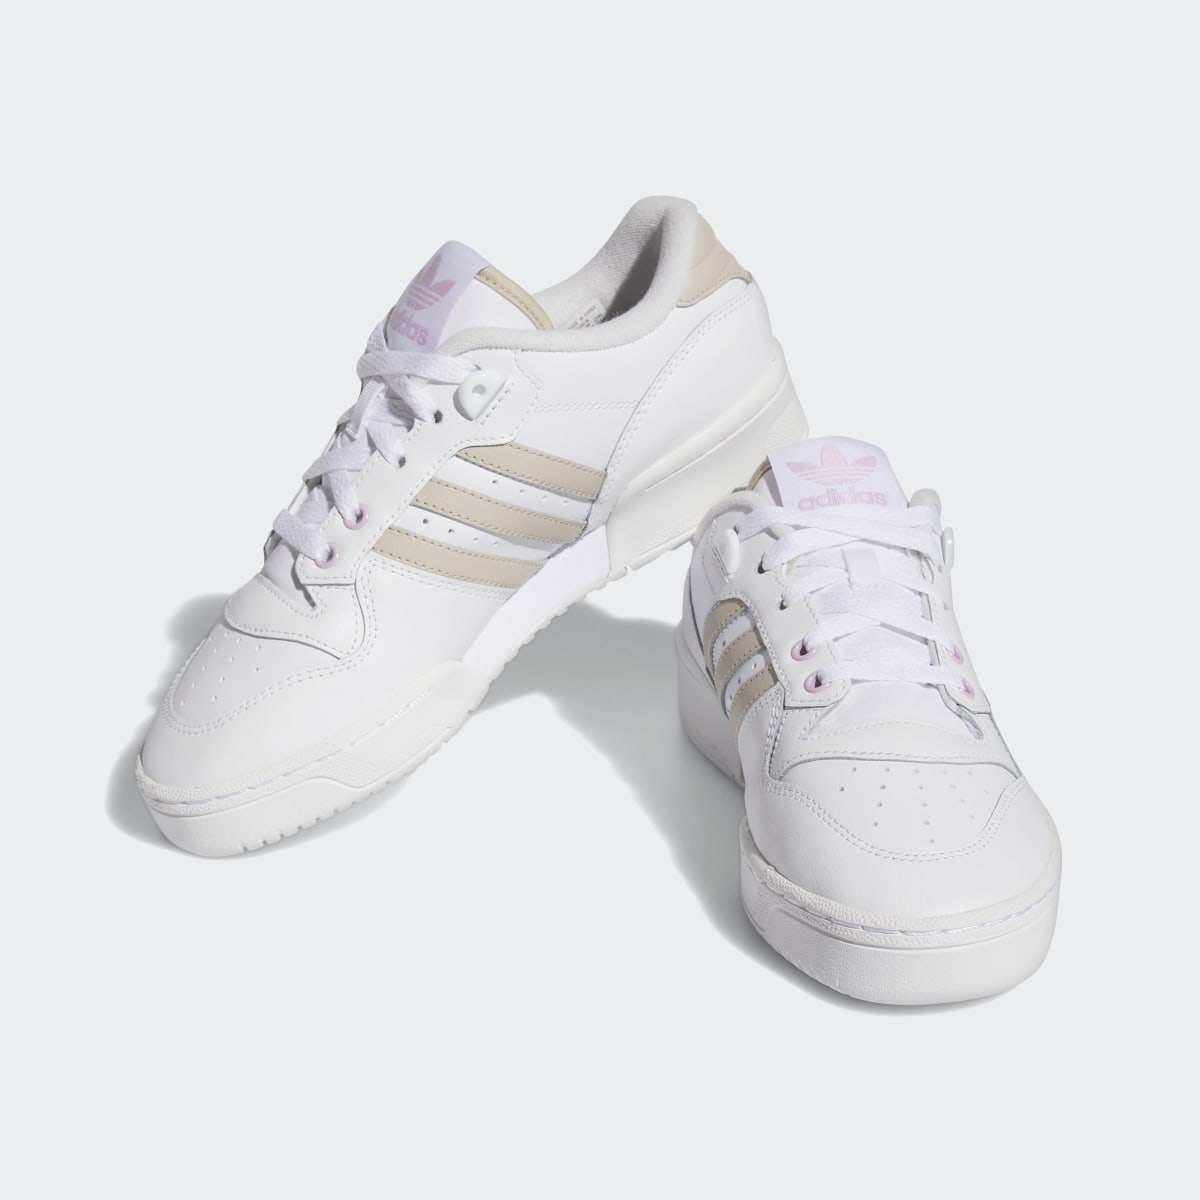 Adidas Rivalry Low Schuh. 5